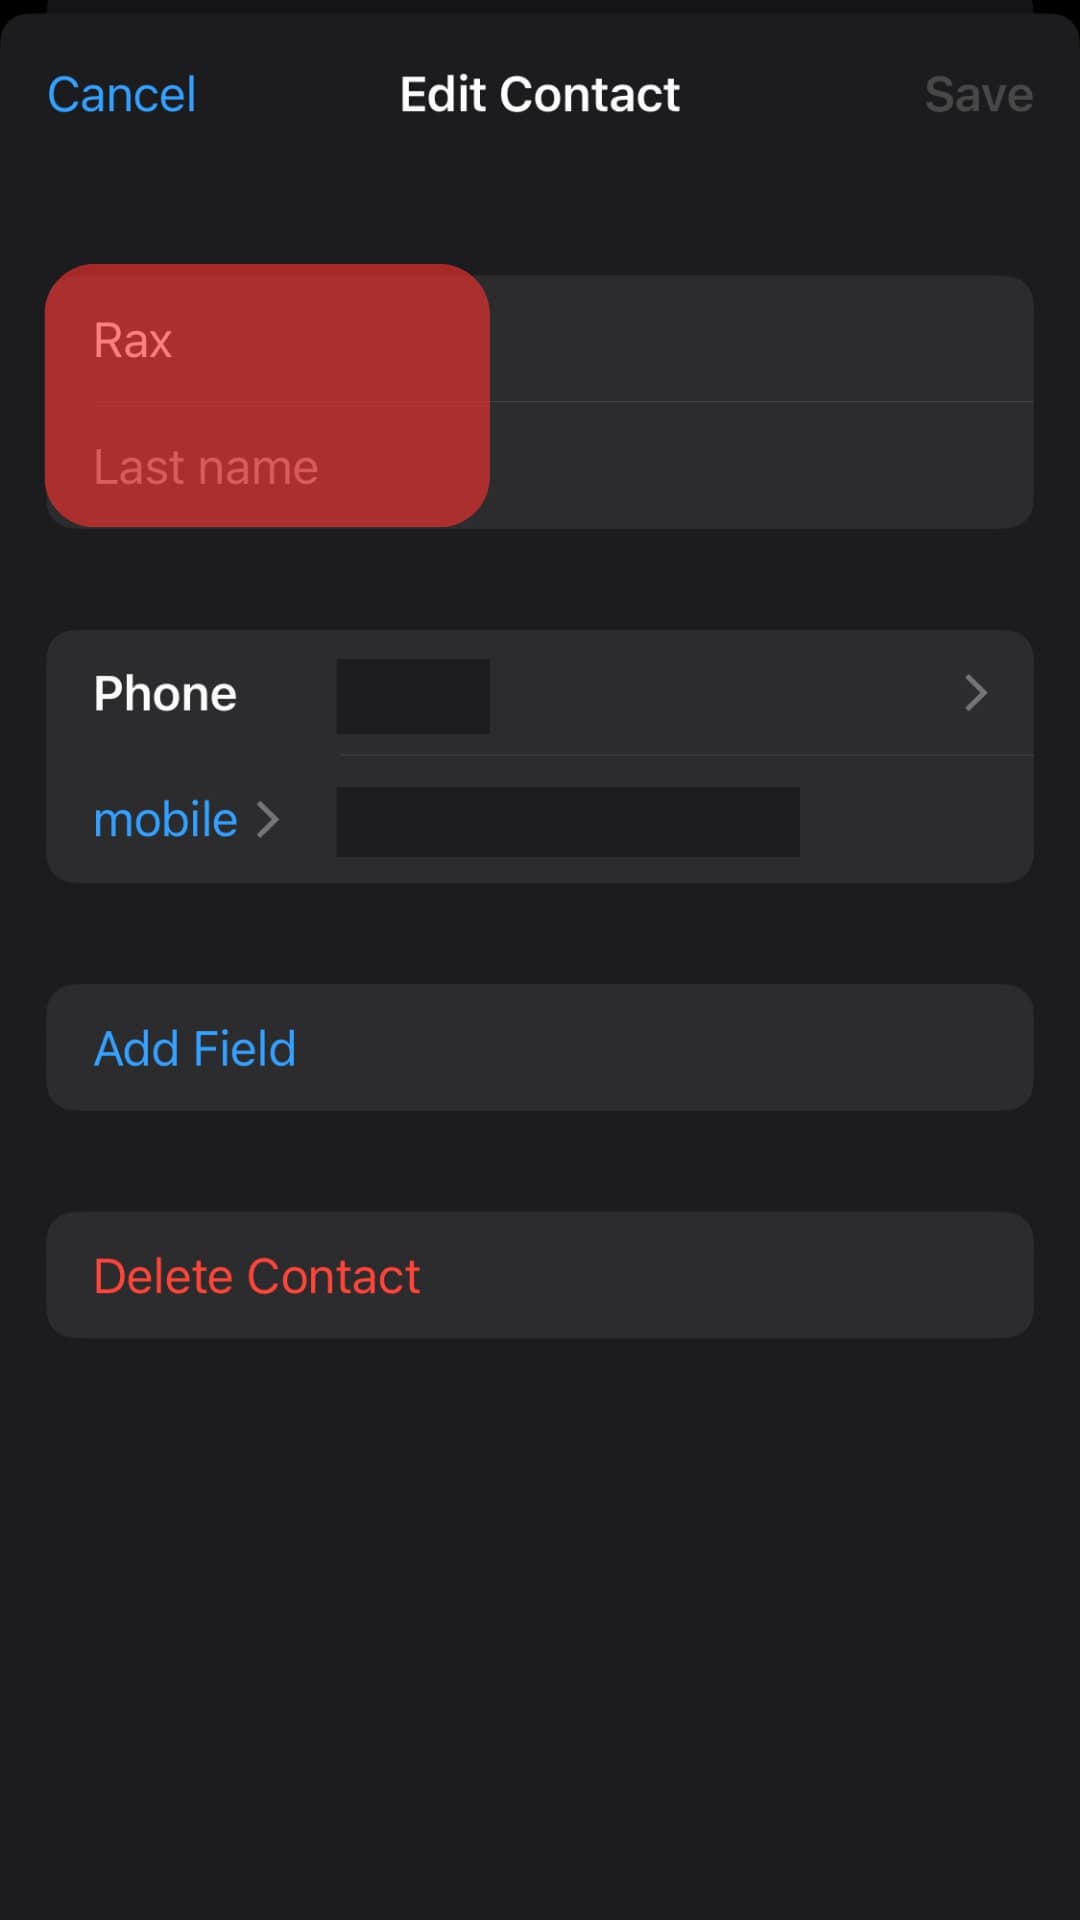 Edit The Contact As You See Fit.